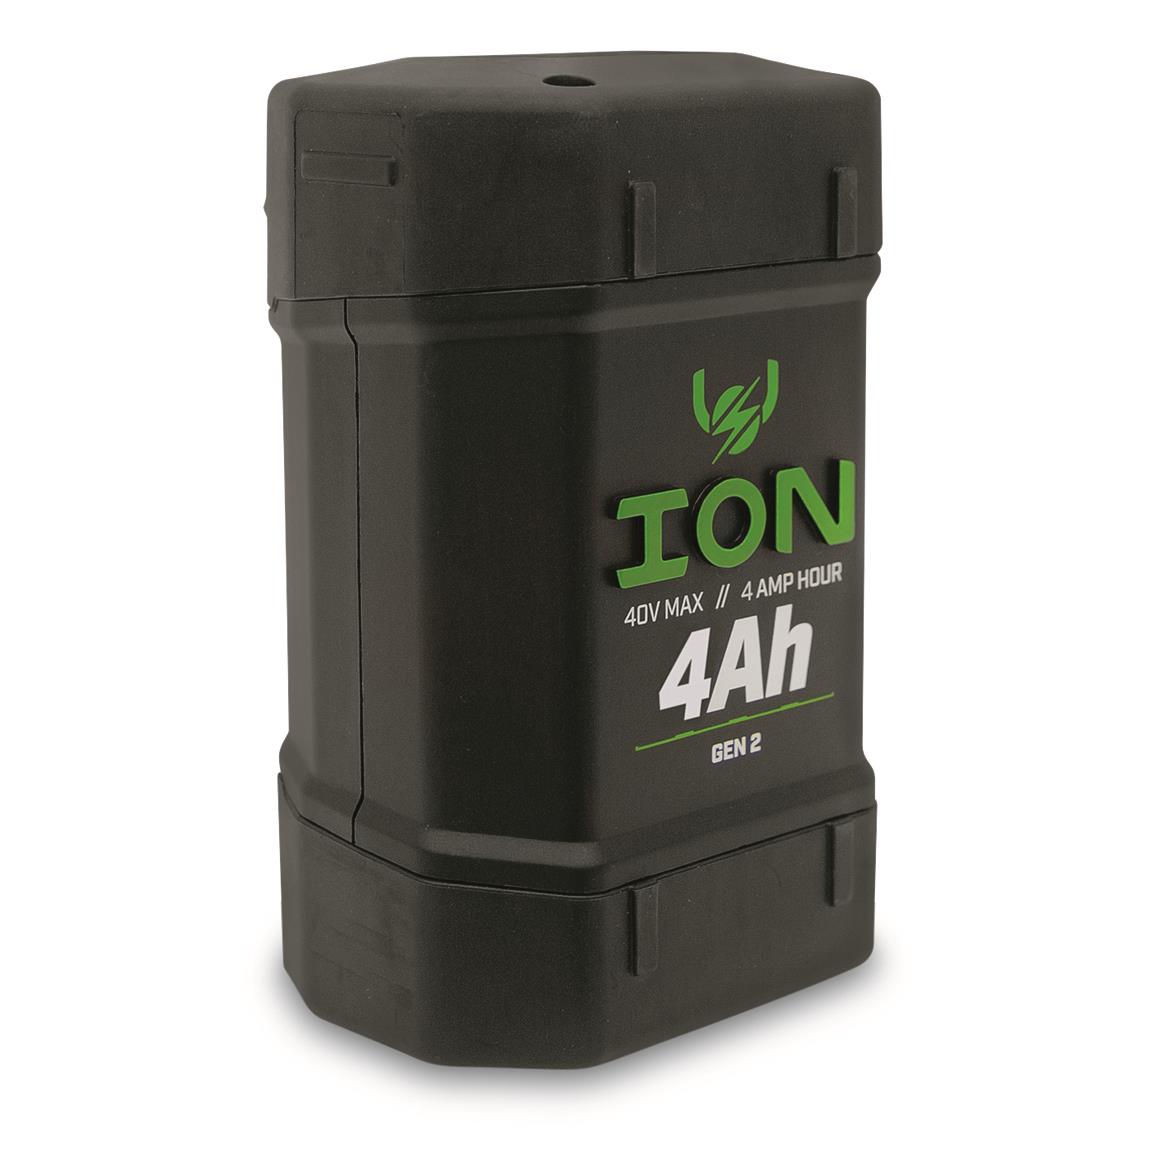 ION Gen 2 40V 4Ah Ice Auger Replacement Battery